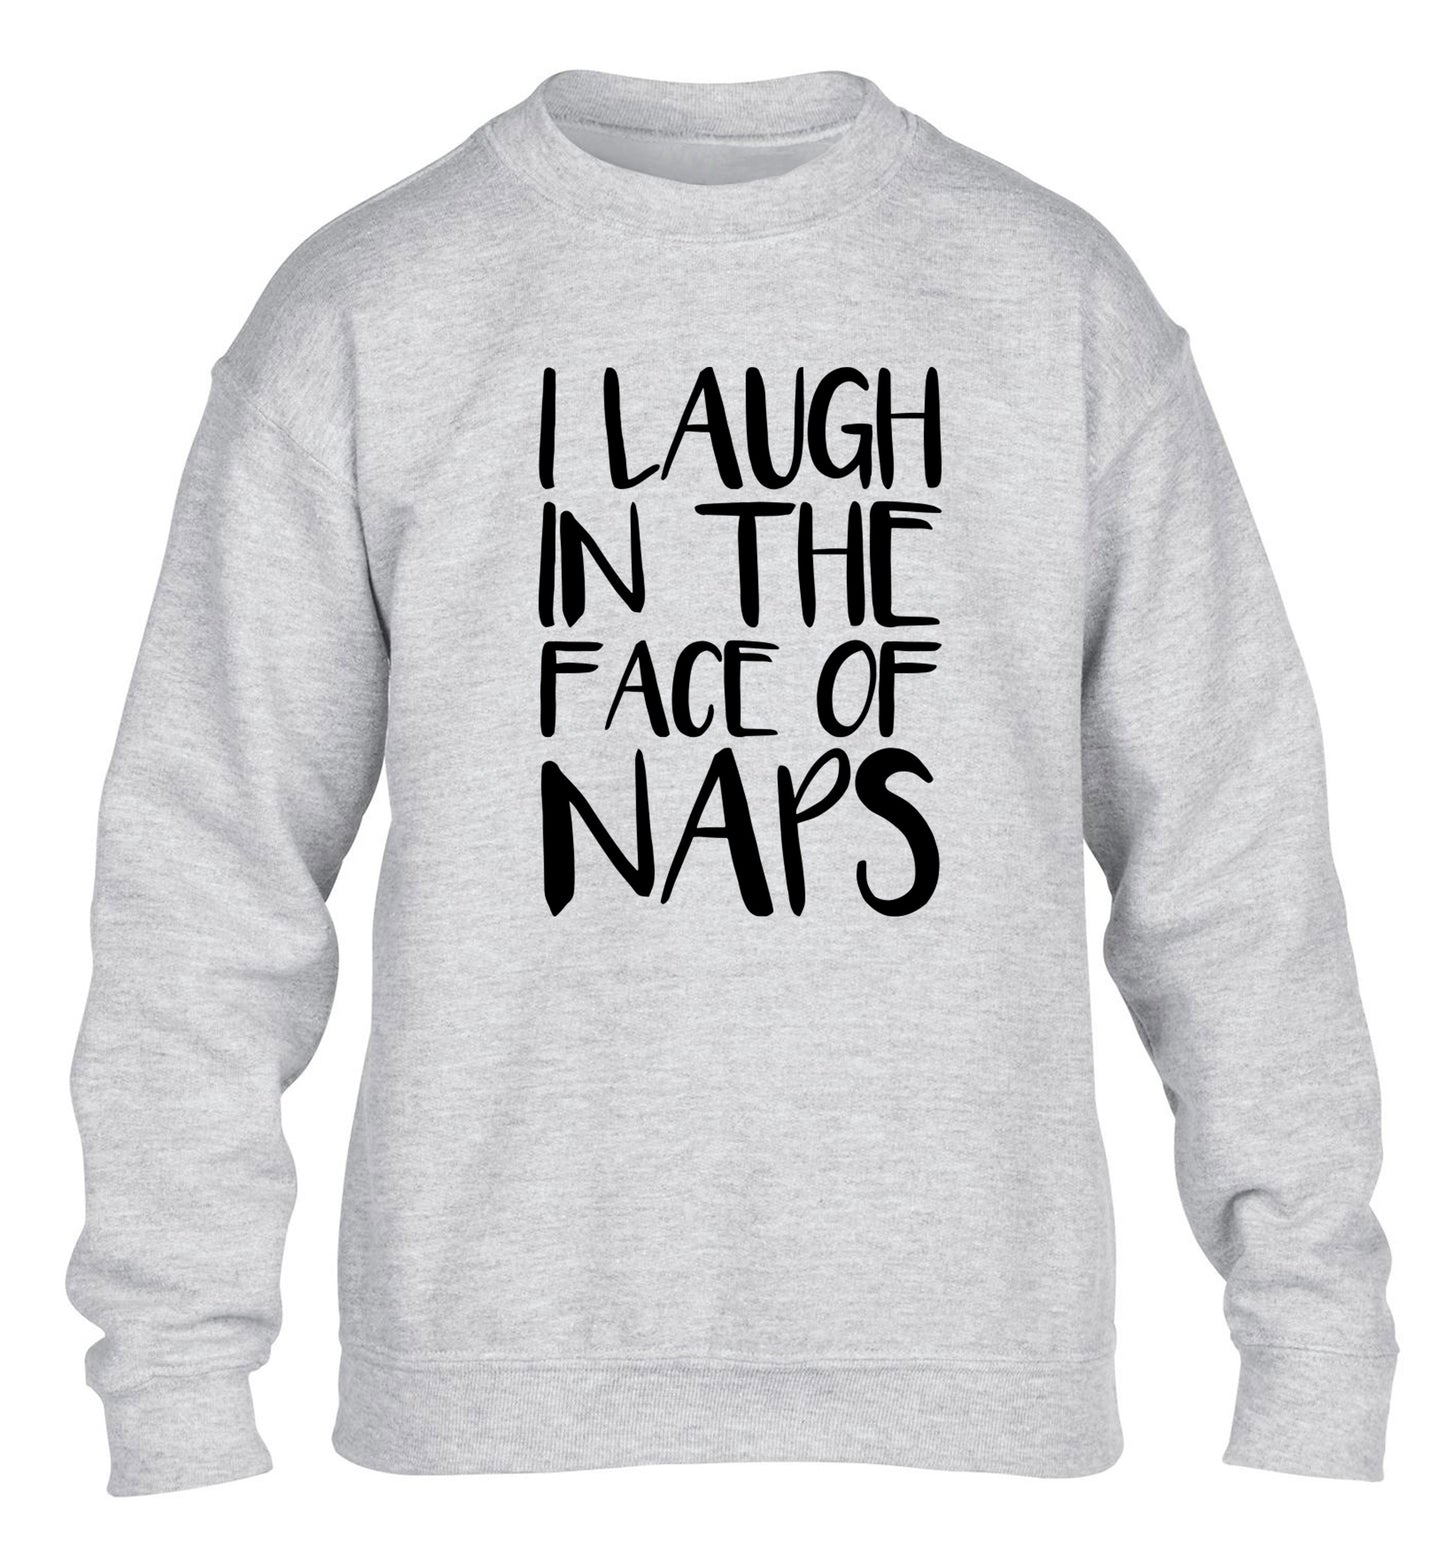 I laugh in the face of naps children's grey sweater 12-14 Years